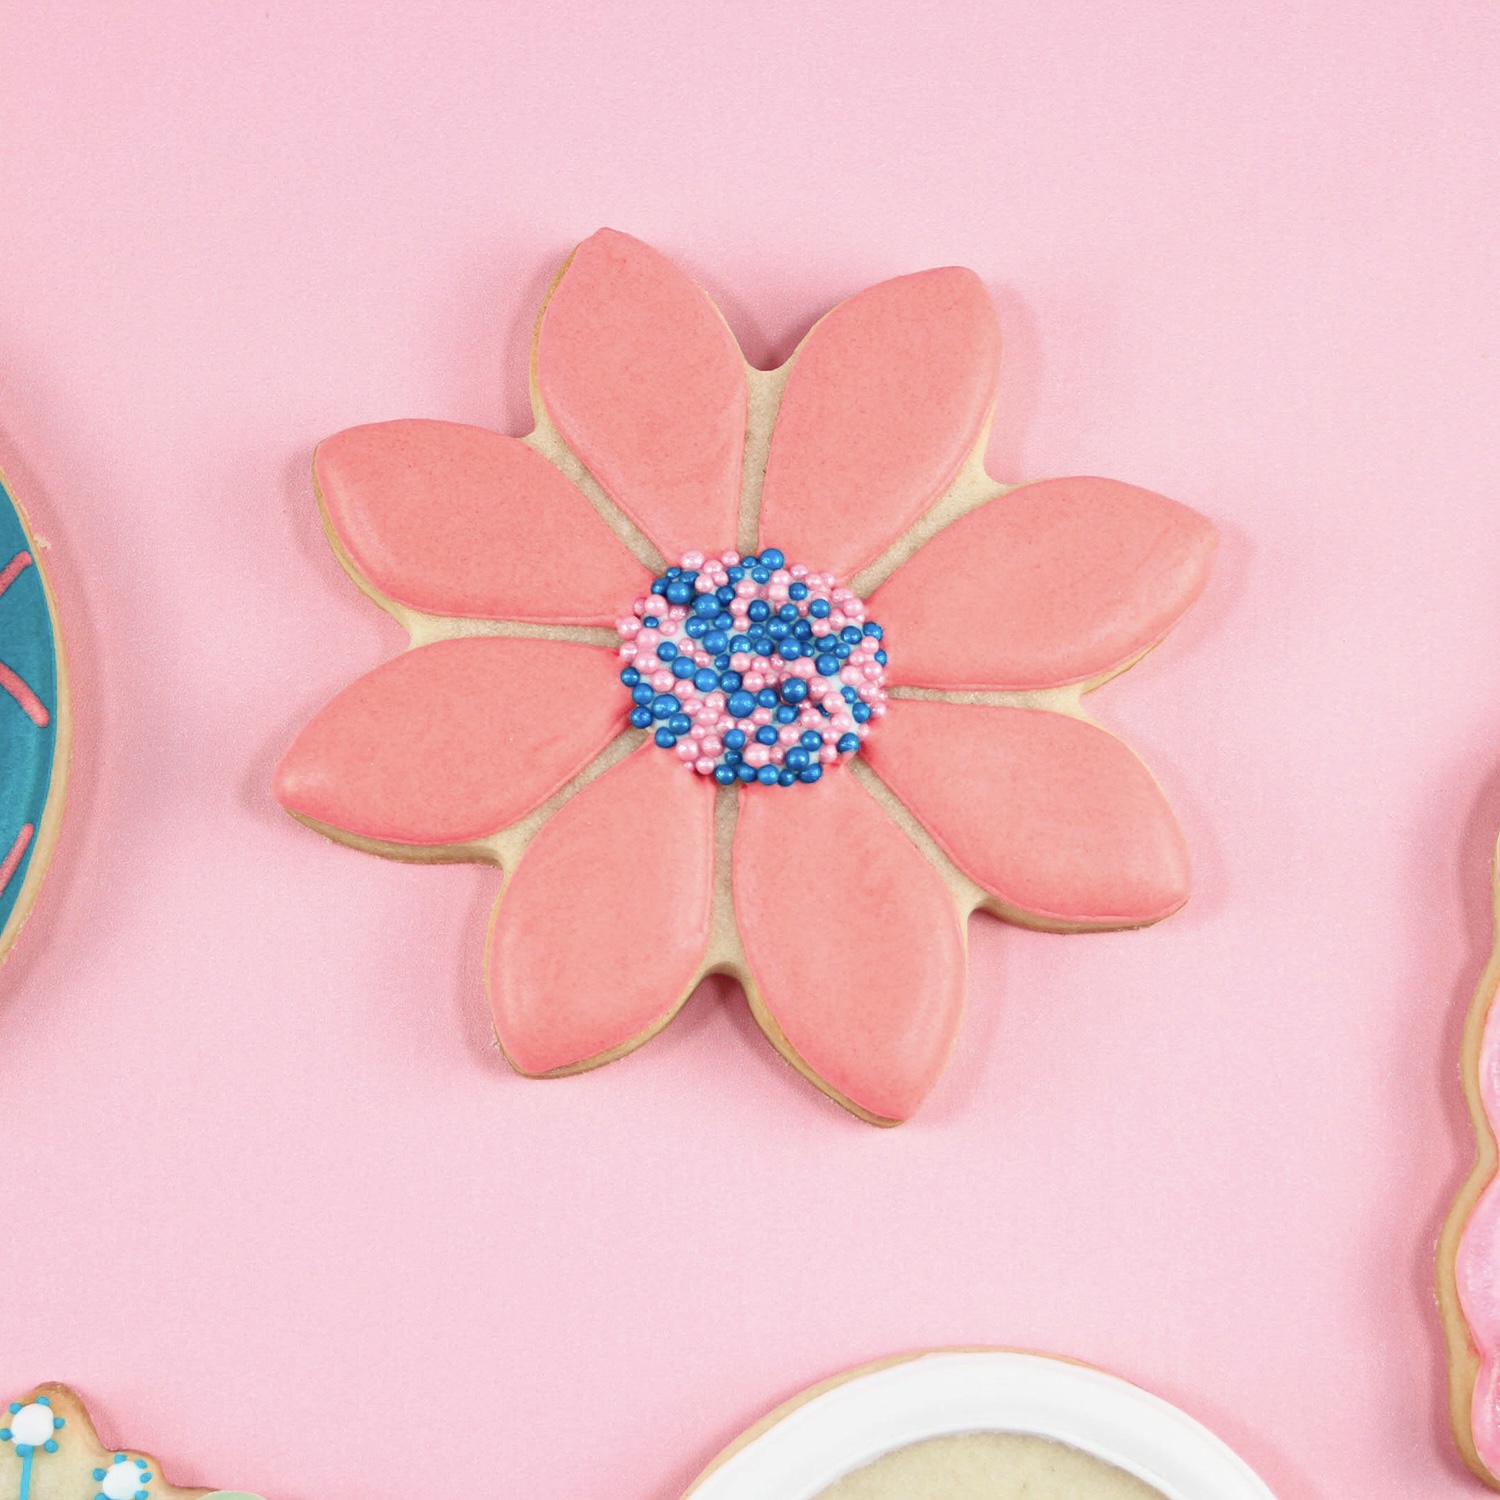 Royal Icing decorated flower cookies with pink and blue nonpareils center